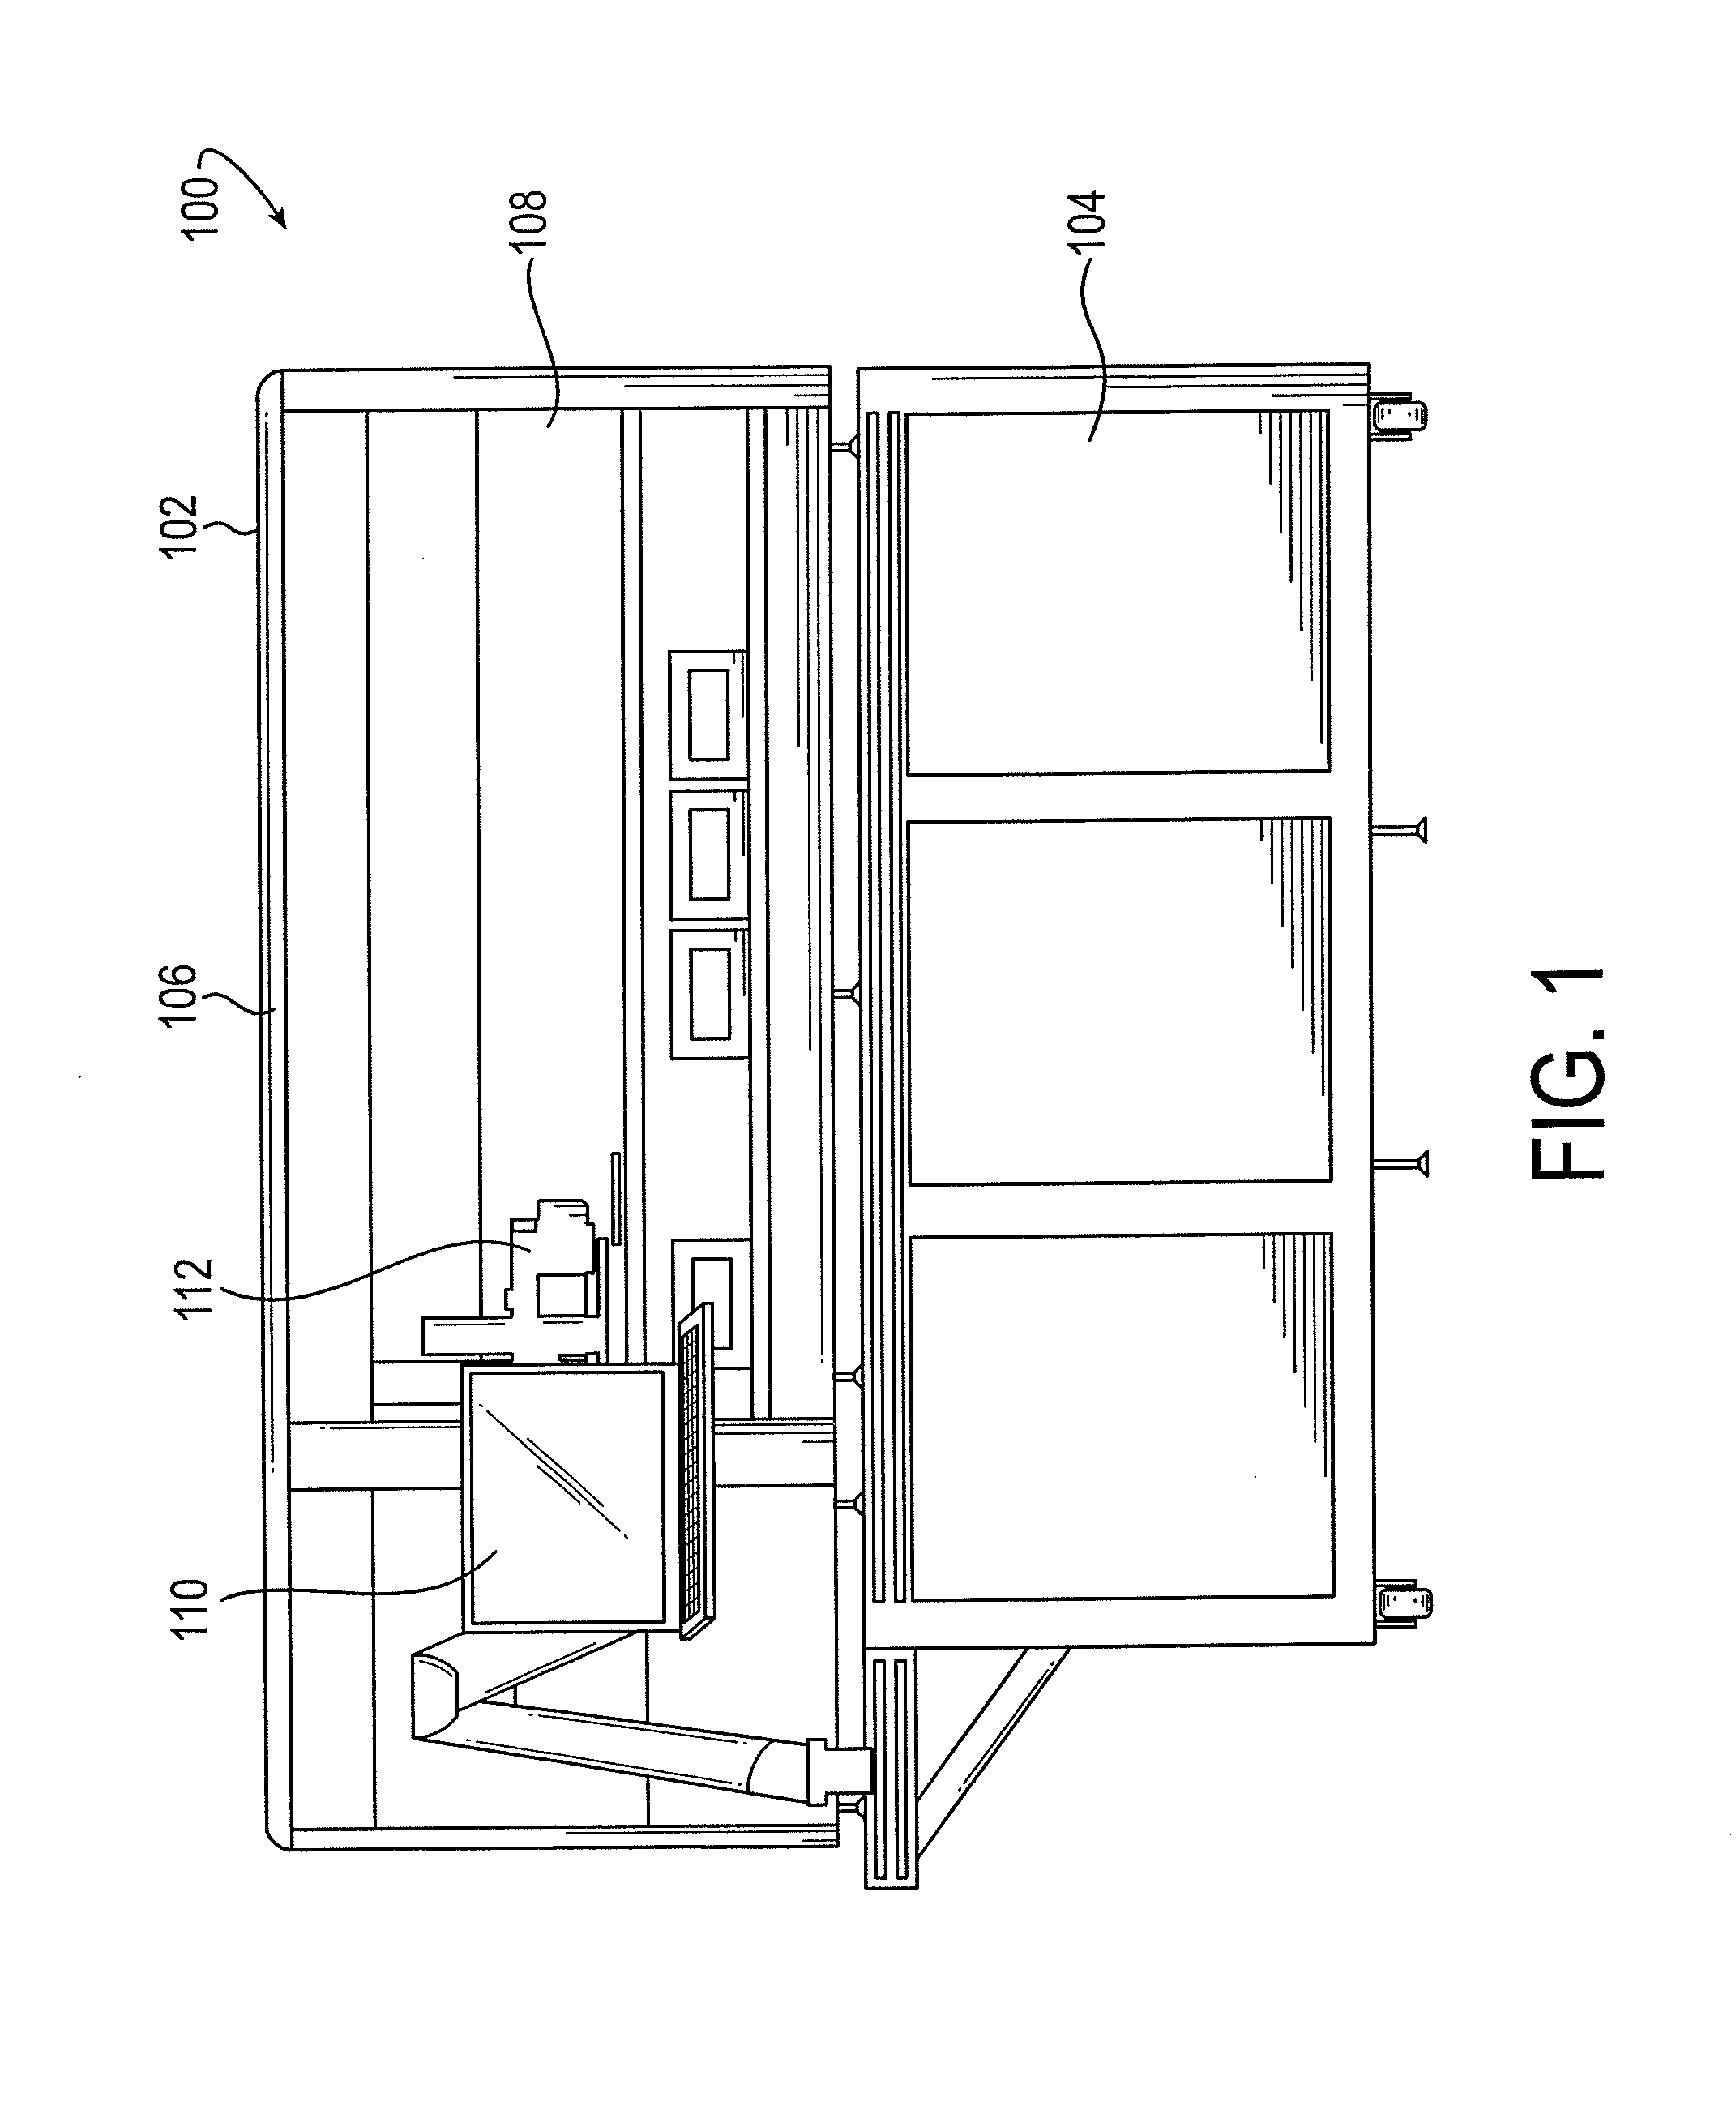 Automated pelletized sample vision inspection apparatus and methods